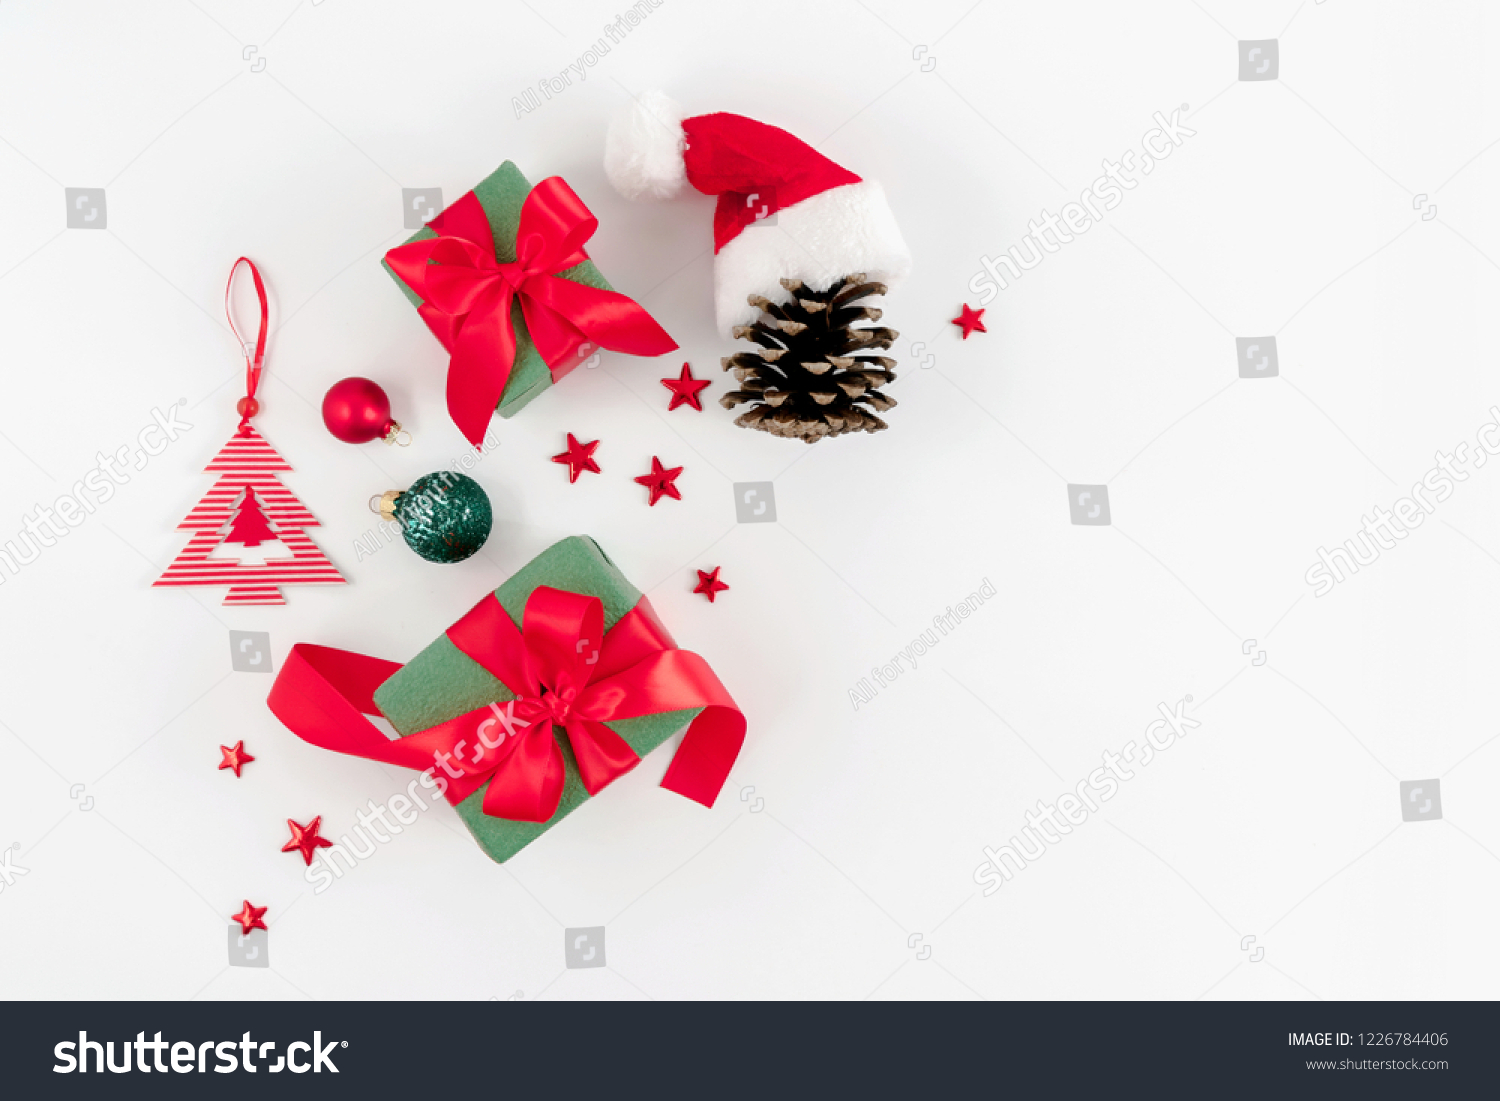 Christmas trendy composition. Xmas red and green decorations on white background. Christmas, New Year, winter concept. Flat lay, top view, copy space #1226784406